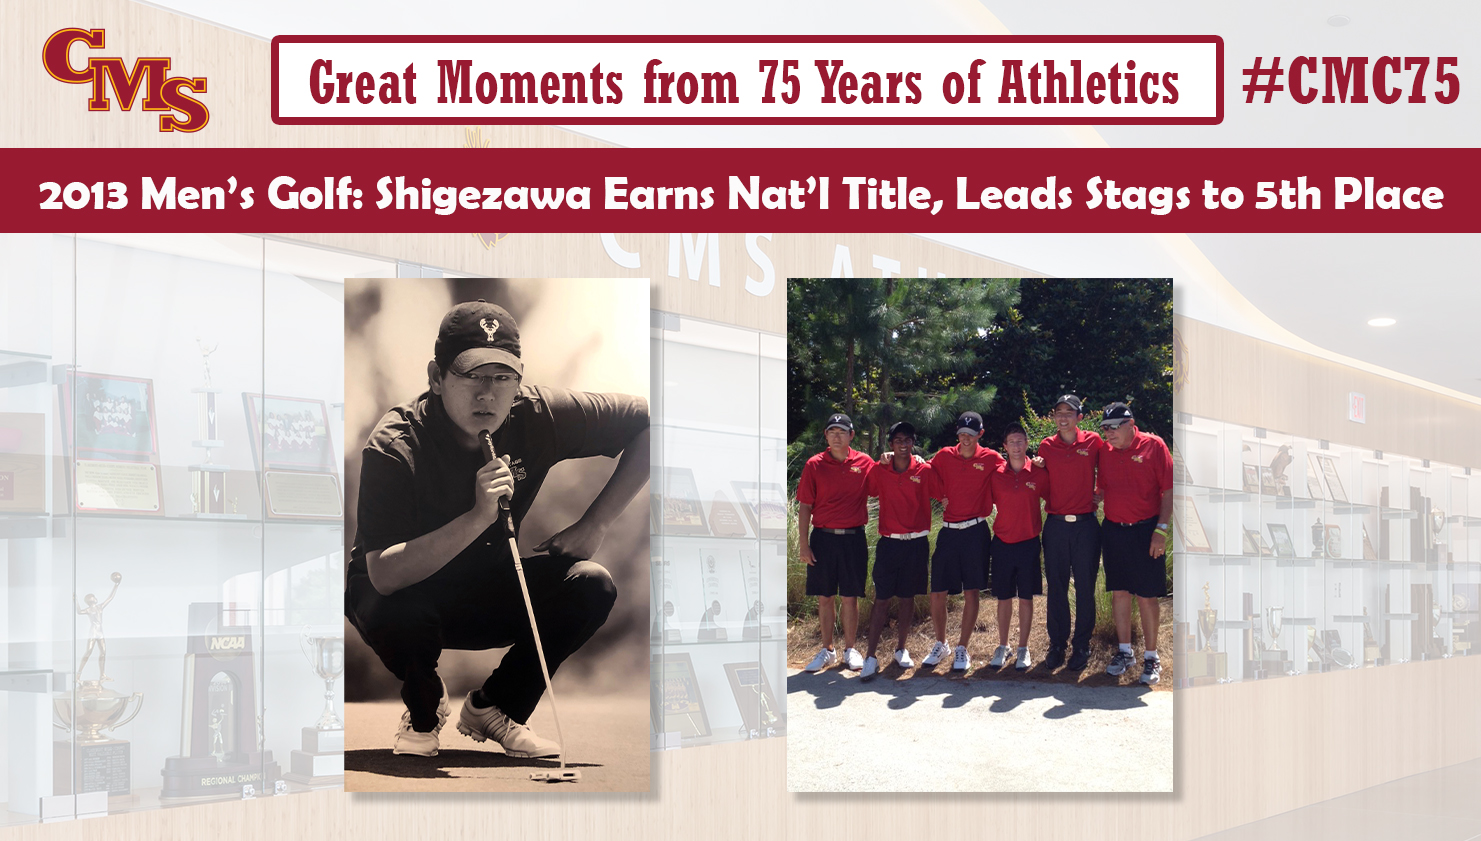 Photo of Bradley Shigezawa and a team shot of the 2013 Stags. Words over the photo read: Great Moments from 75 Years of Athletics, 2013 Men's Golf: Shigezawa Wins National Titles, Leads Stags to 5th Place